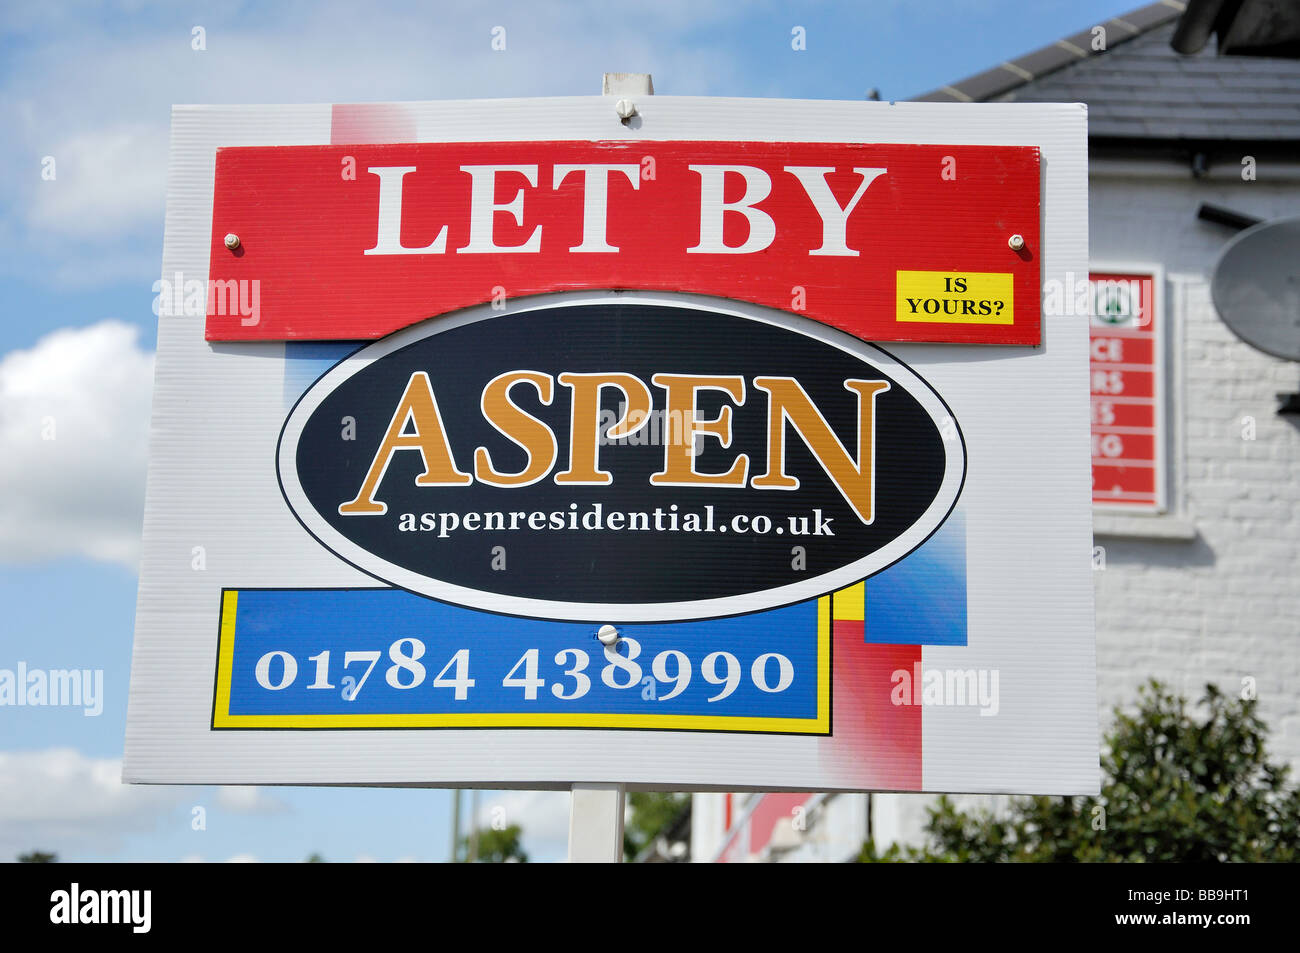 'Let by' estate agent's sign, Englefield Green, Surrey, England, United Kingdom Stock Photo